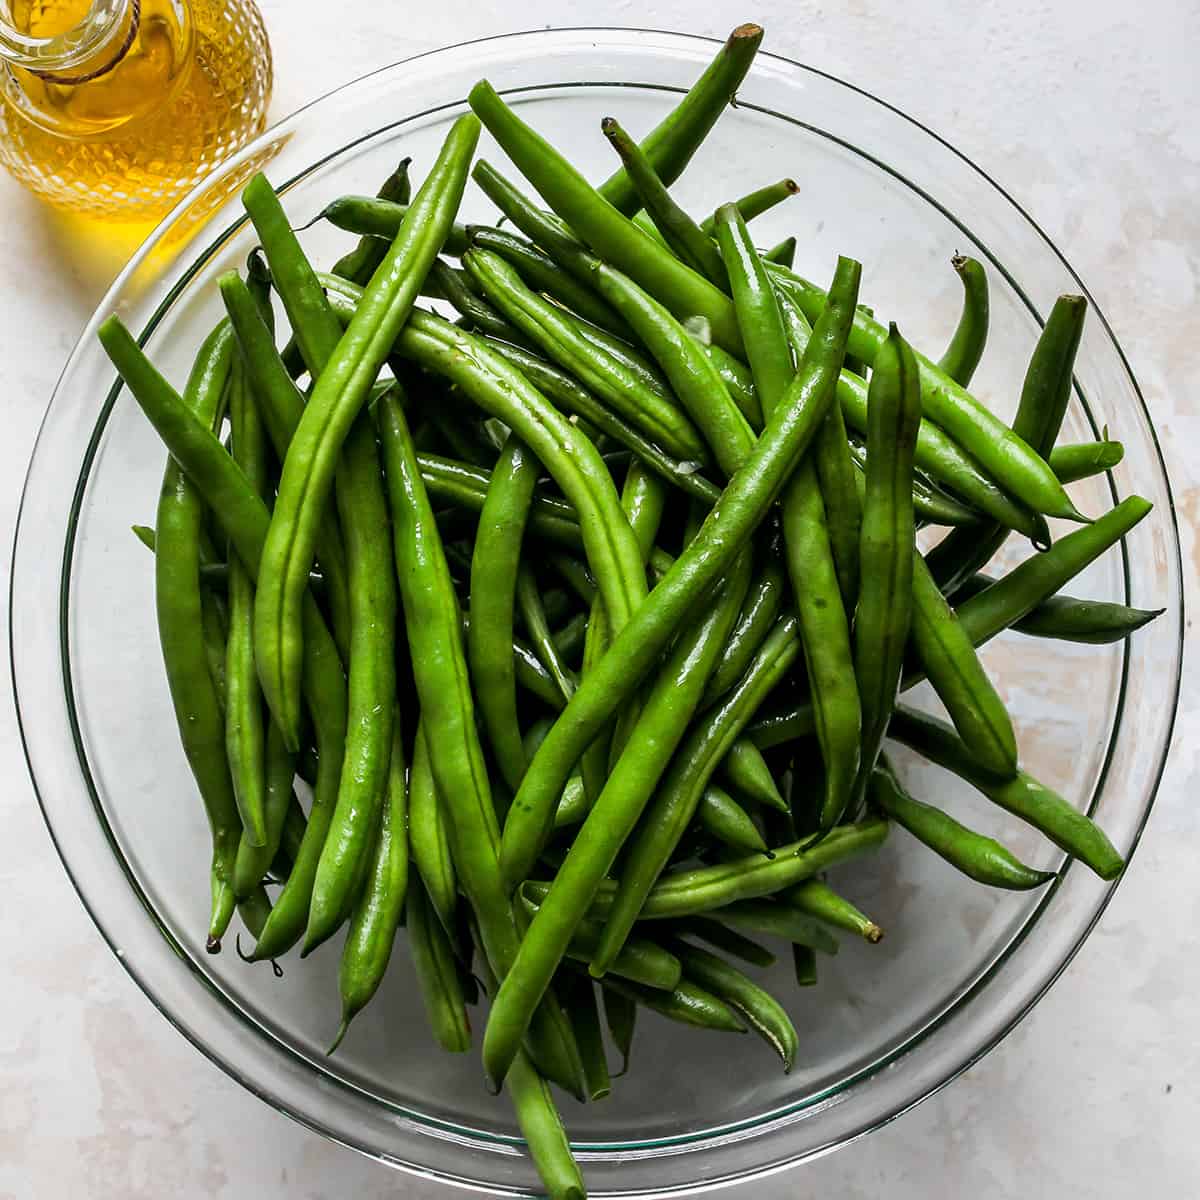 photo showing How to Roast Green Beans - washed trimmed green beans in a bowl